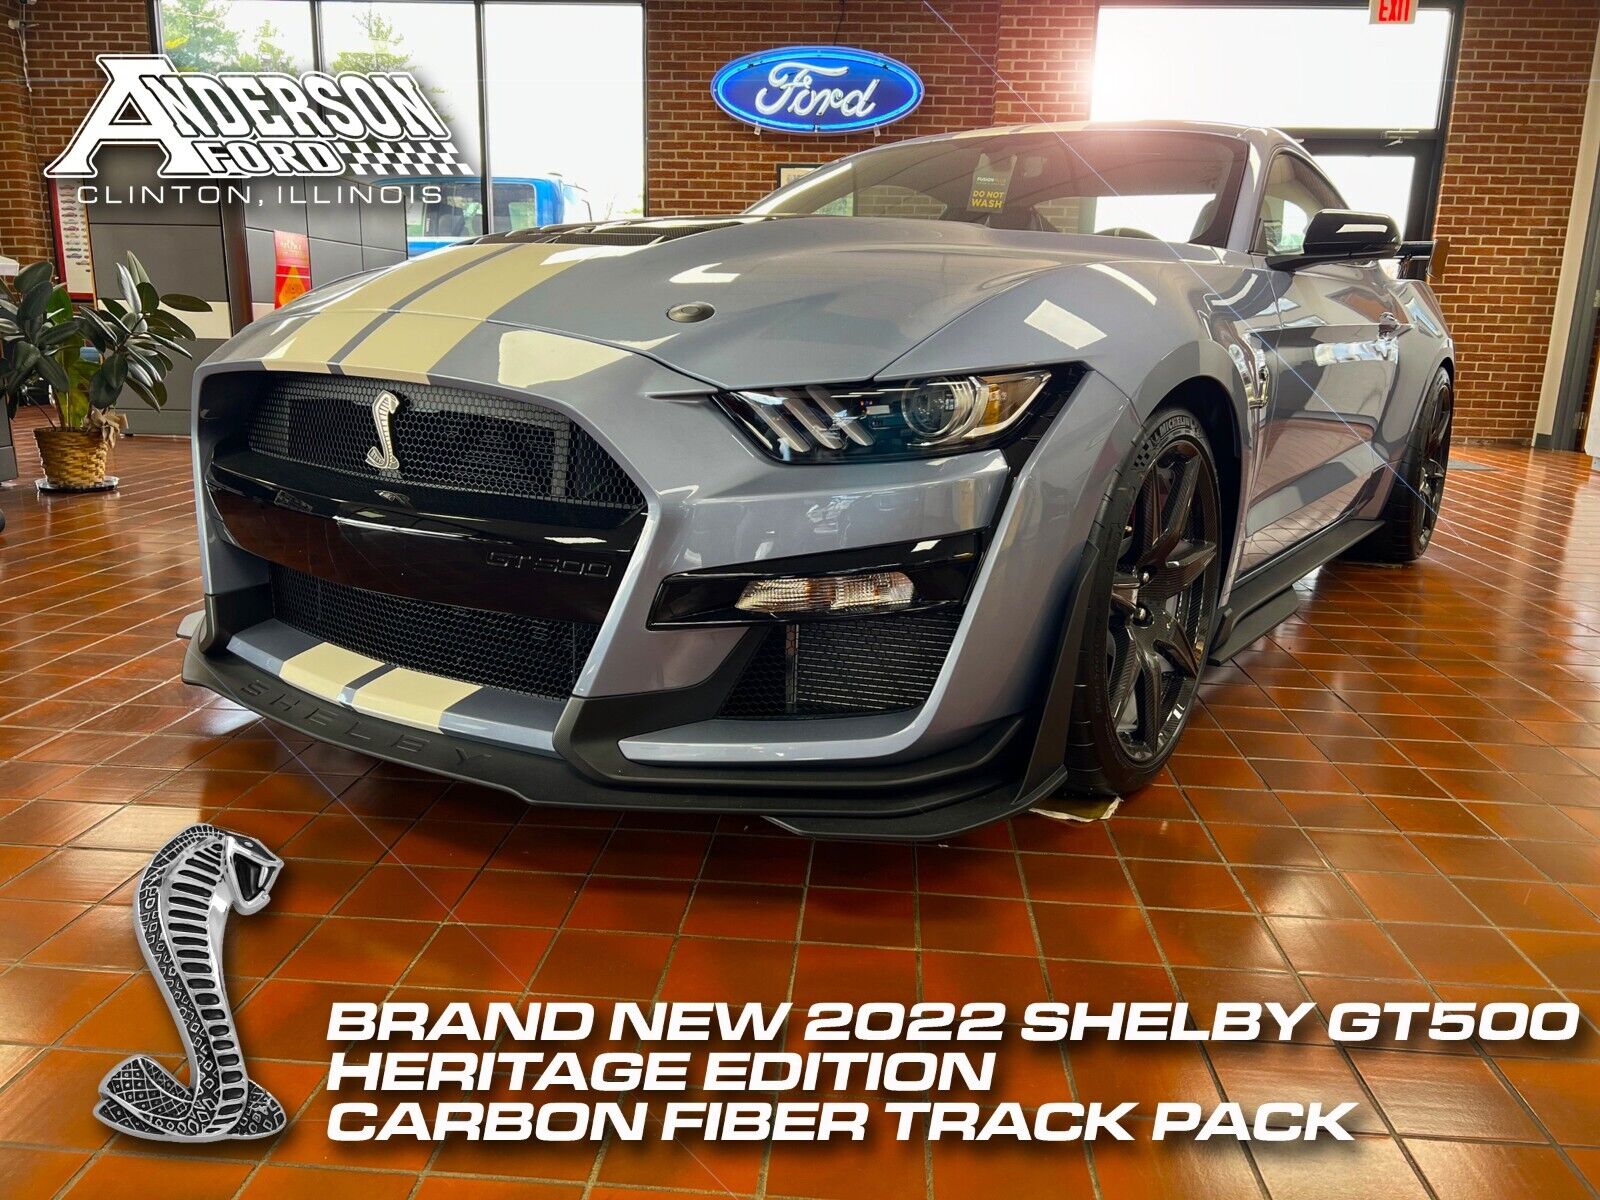 2022 Ford Mustang BRAND NEW SHELBY GT 500 HERITAGE EDITION